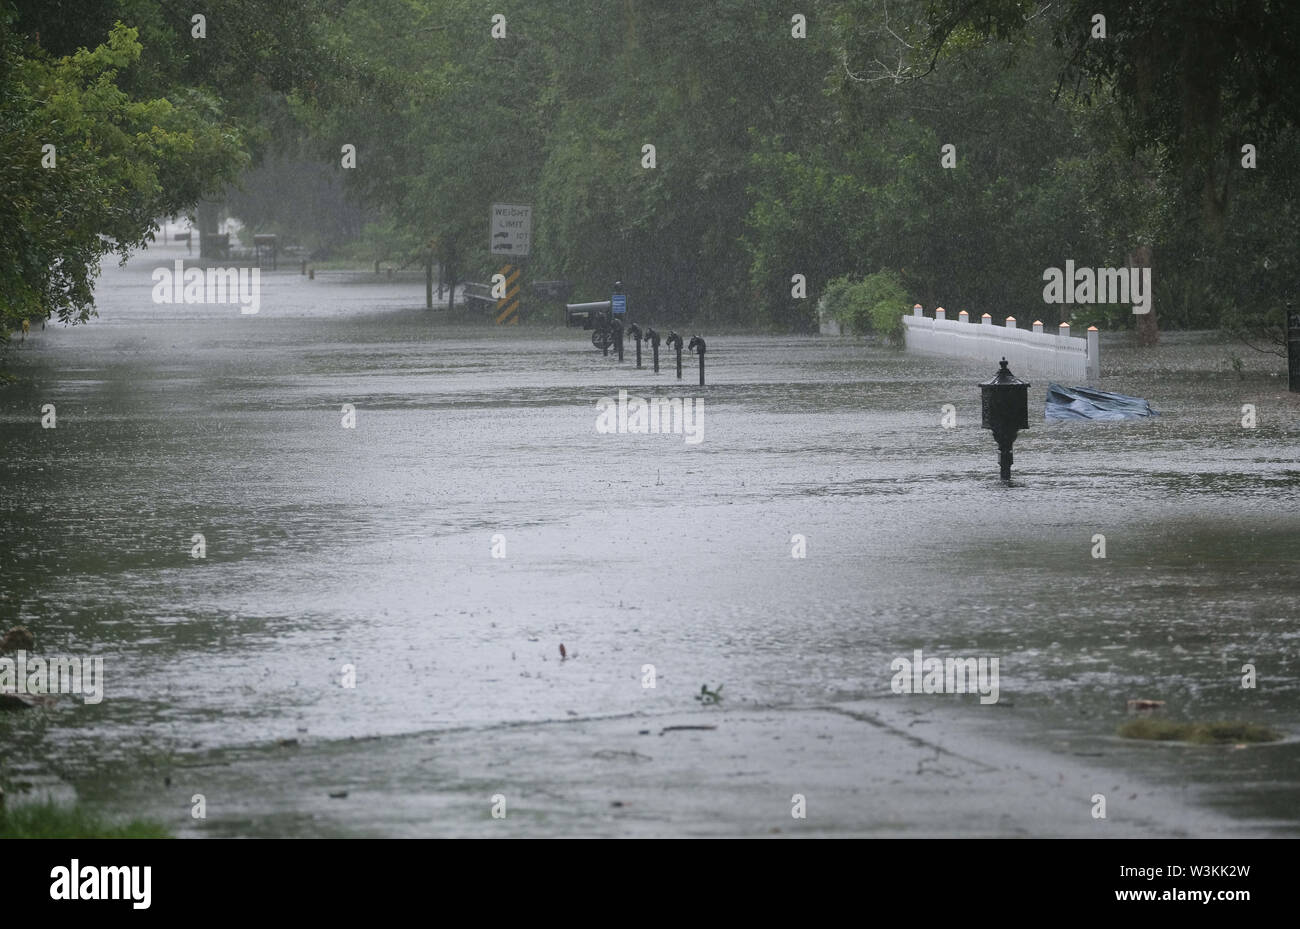 July 13, 2019 - Mandeville, LOUISIANA, U.S - A flooded road near Lake Pontchartrain in Mandeville, Louisiana USA as Hurricane Barry makes landfall on July 13, 2019. (Credit Image: © Dan Anderson/ZUMA Wire) Stock Photo